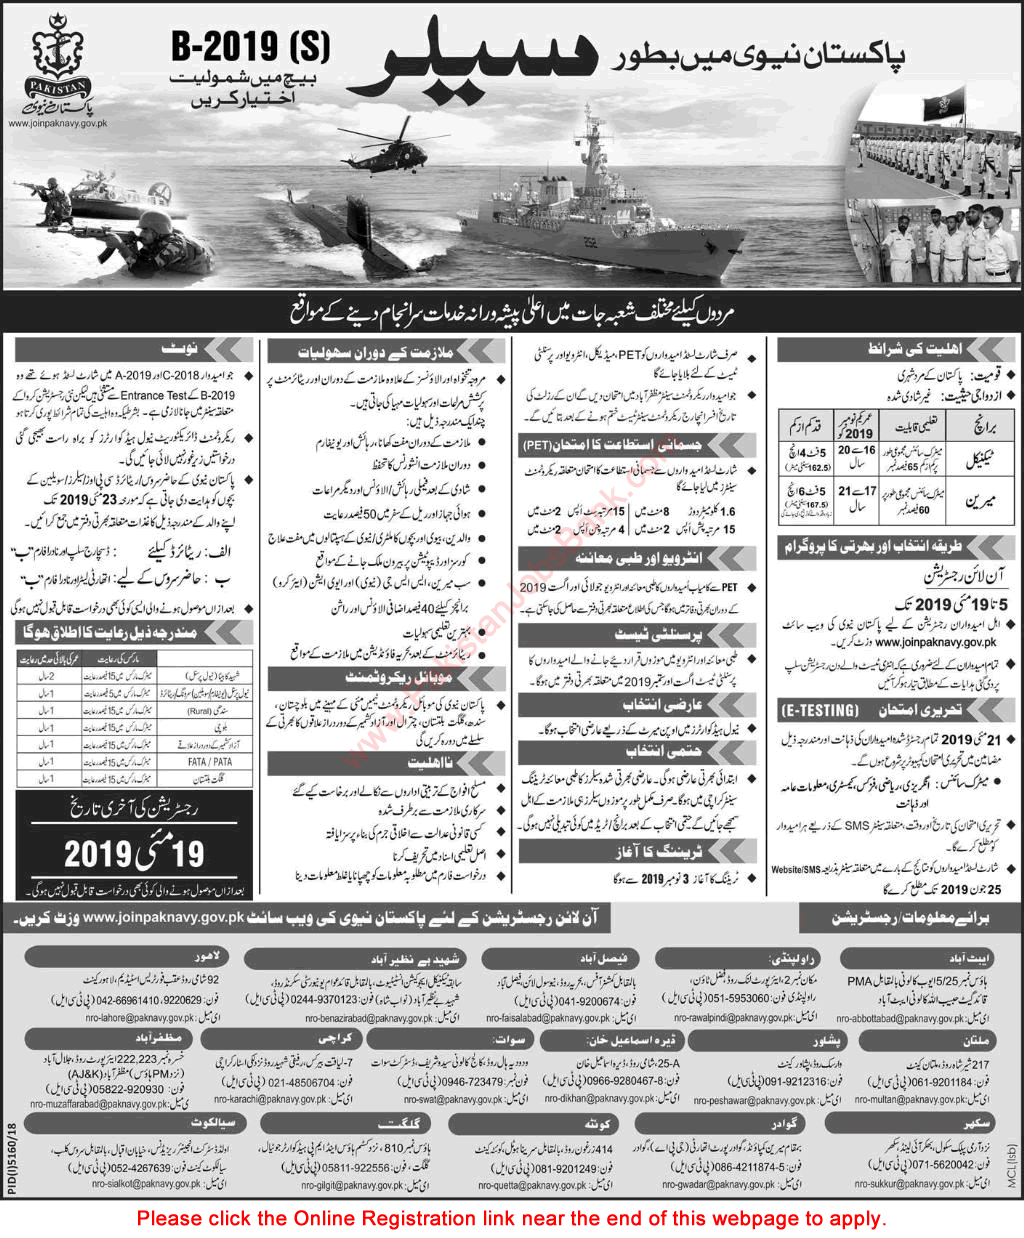 Join Pakistan Navy as Sailor May 2019 Online Registration Jobs in B-2019(S) Batch Latest